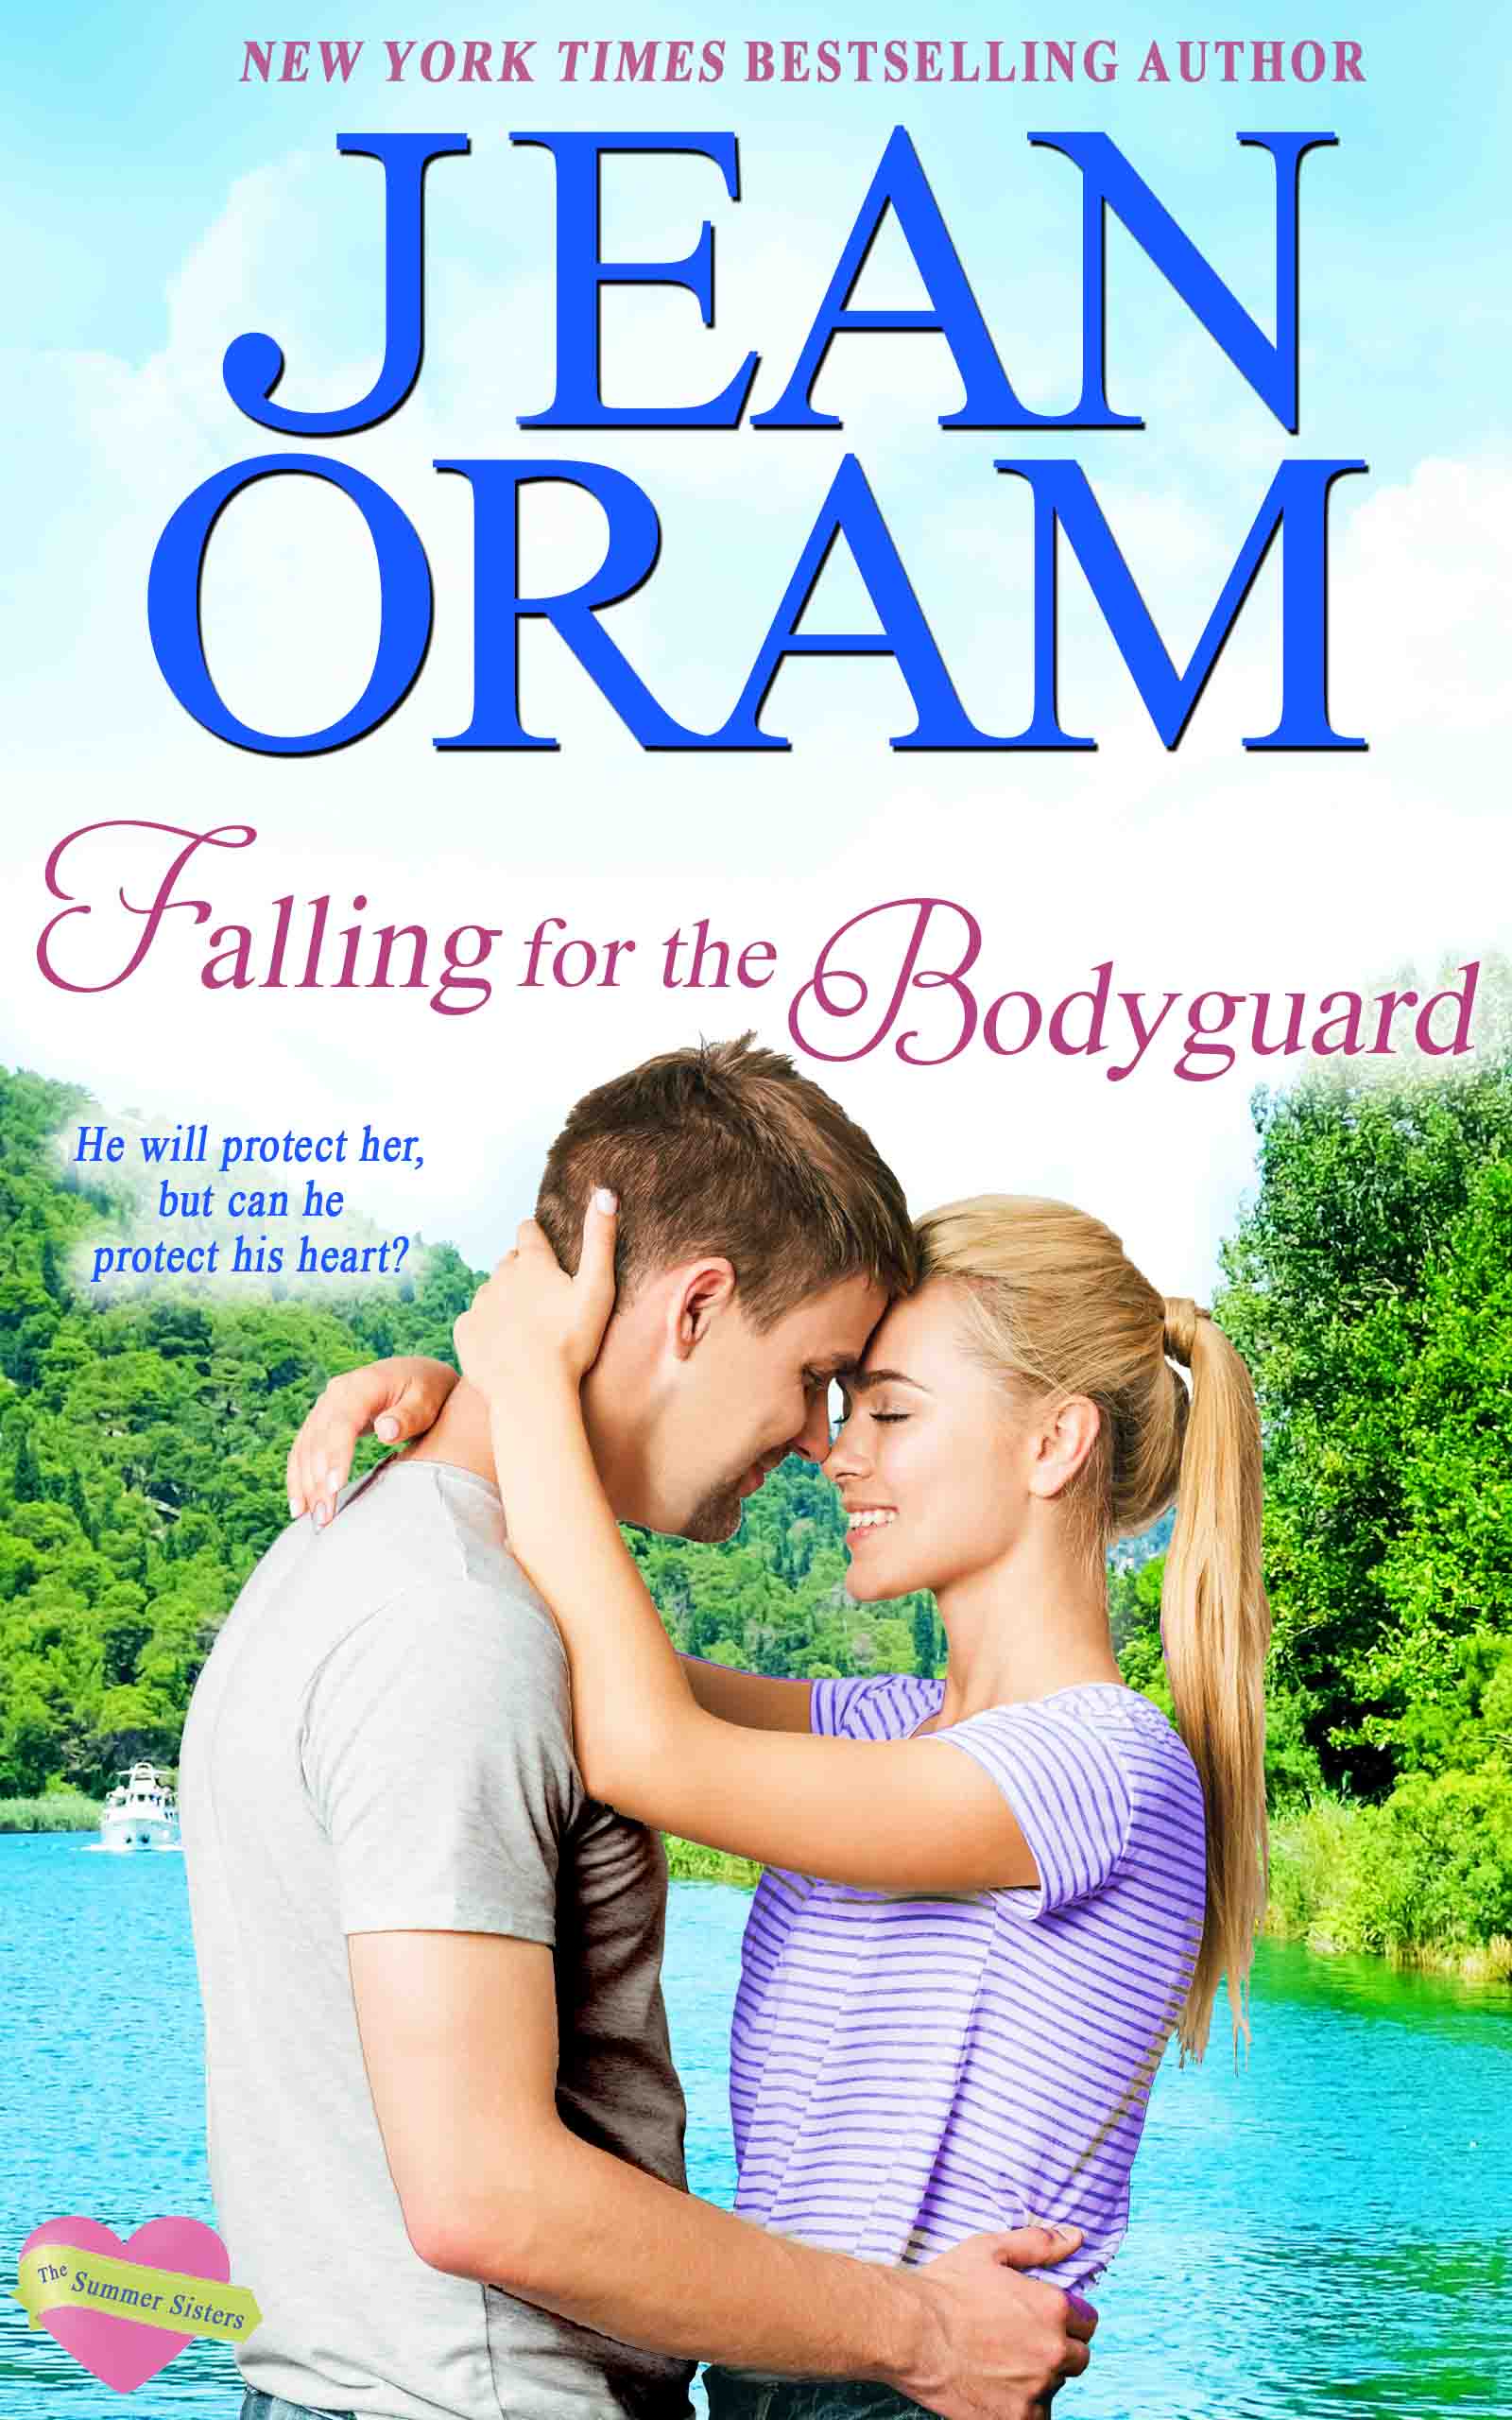 Falling for the Bodyguard - Love and Danger by Jean Oram. Irresistible sweet small town romances. The Summer Sisters bodyguard sweet romance.